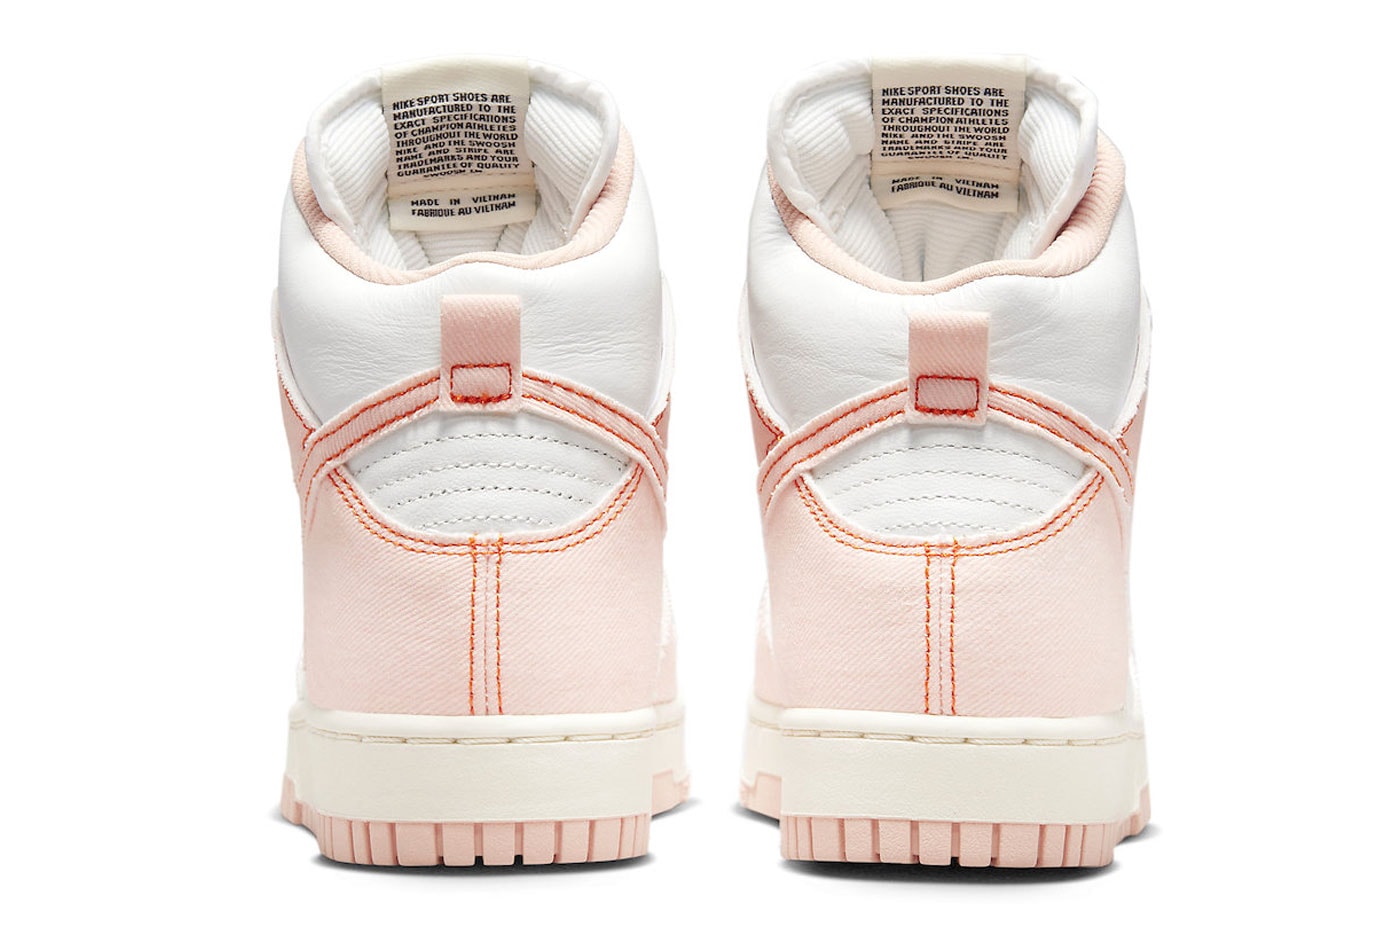 Take a Look at the Official Images of the Nike Dunk High 1985 "Arctic Orange" DV1143-800 vintage